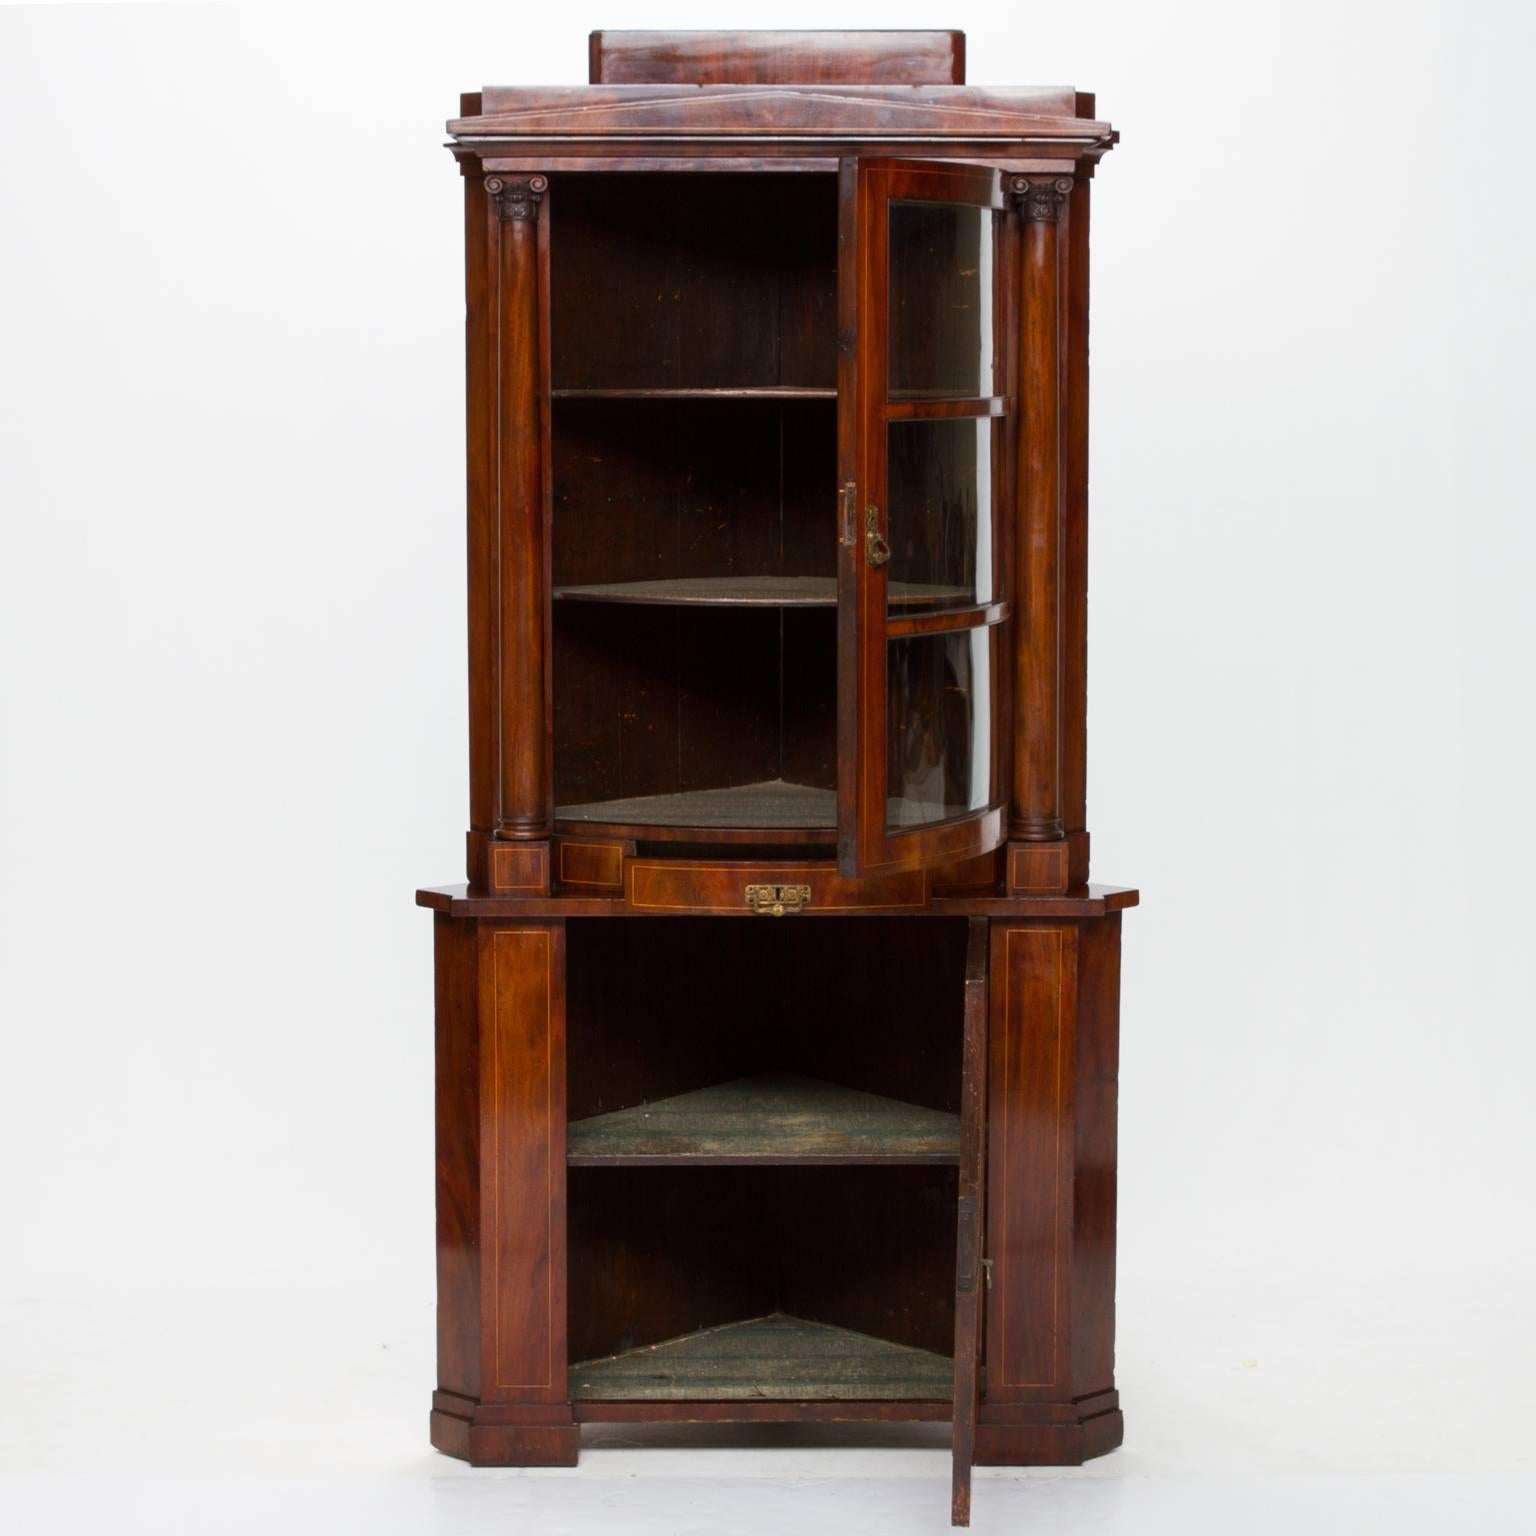 19th century mahogany inlaid English corner cabinet. This corner cabinet is two parts. The top section has a bow front. The glass is bowed and wavy. This opens to reveal two shelves with vennered fronts. On each side are two fine turned columns